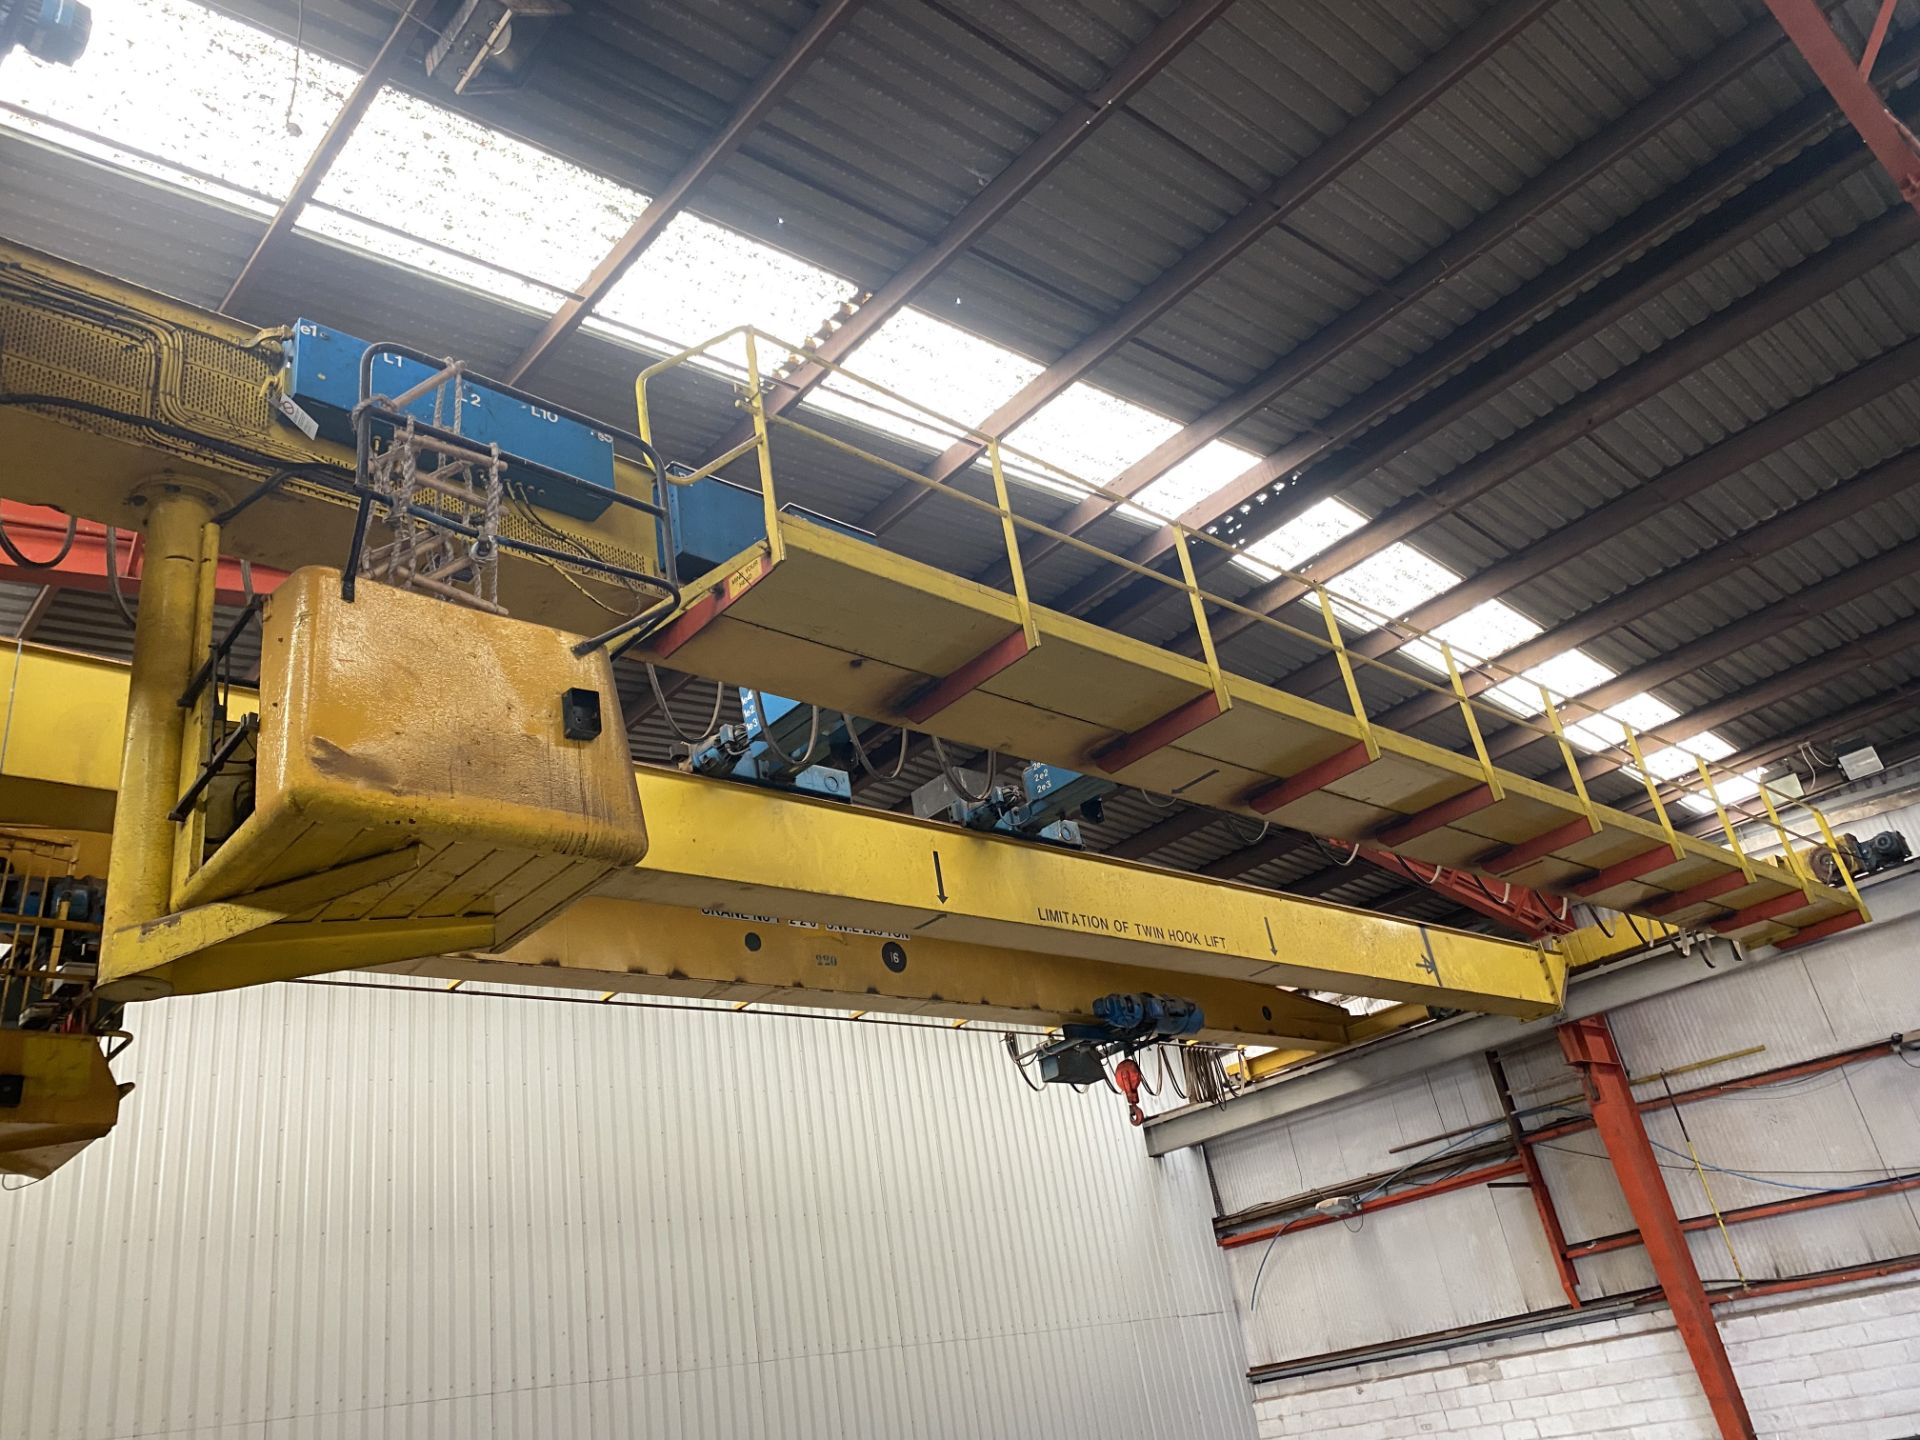 2 X 5T SWL TWIN GIRDER TRAVELLING OVERHEAD CRANE, no. 1787-76, (incomplete – no carriages or